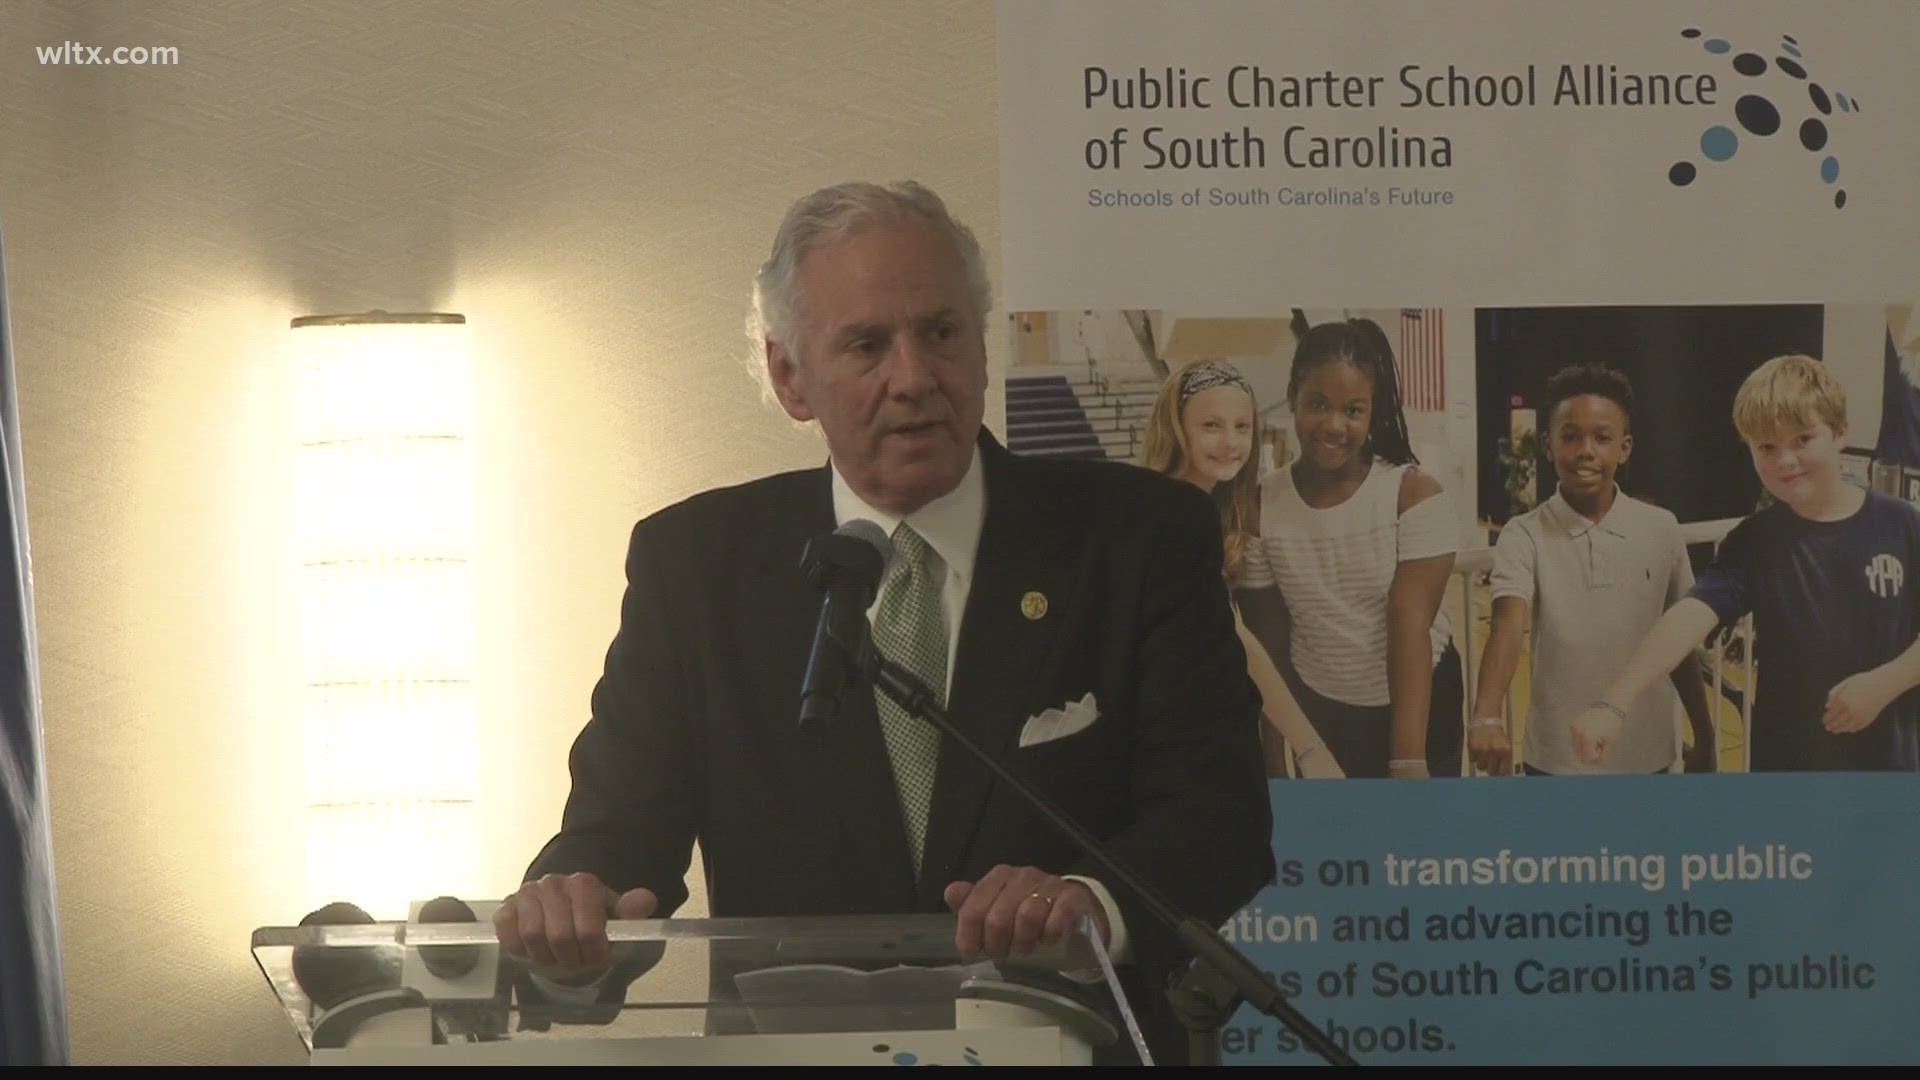 The event brings charter schools together to connect and exchange ideas, featuring several presentations given by experts, elected officials, and school leaders.